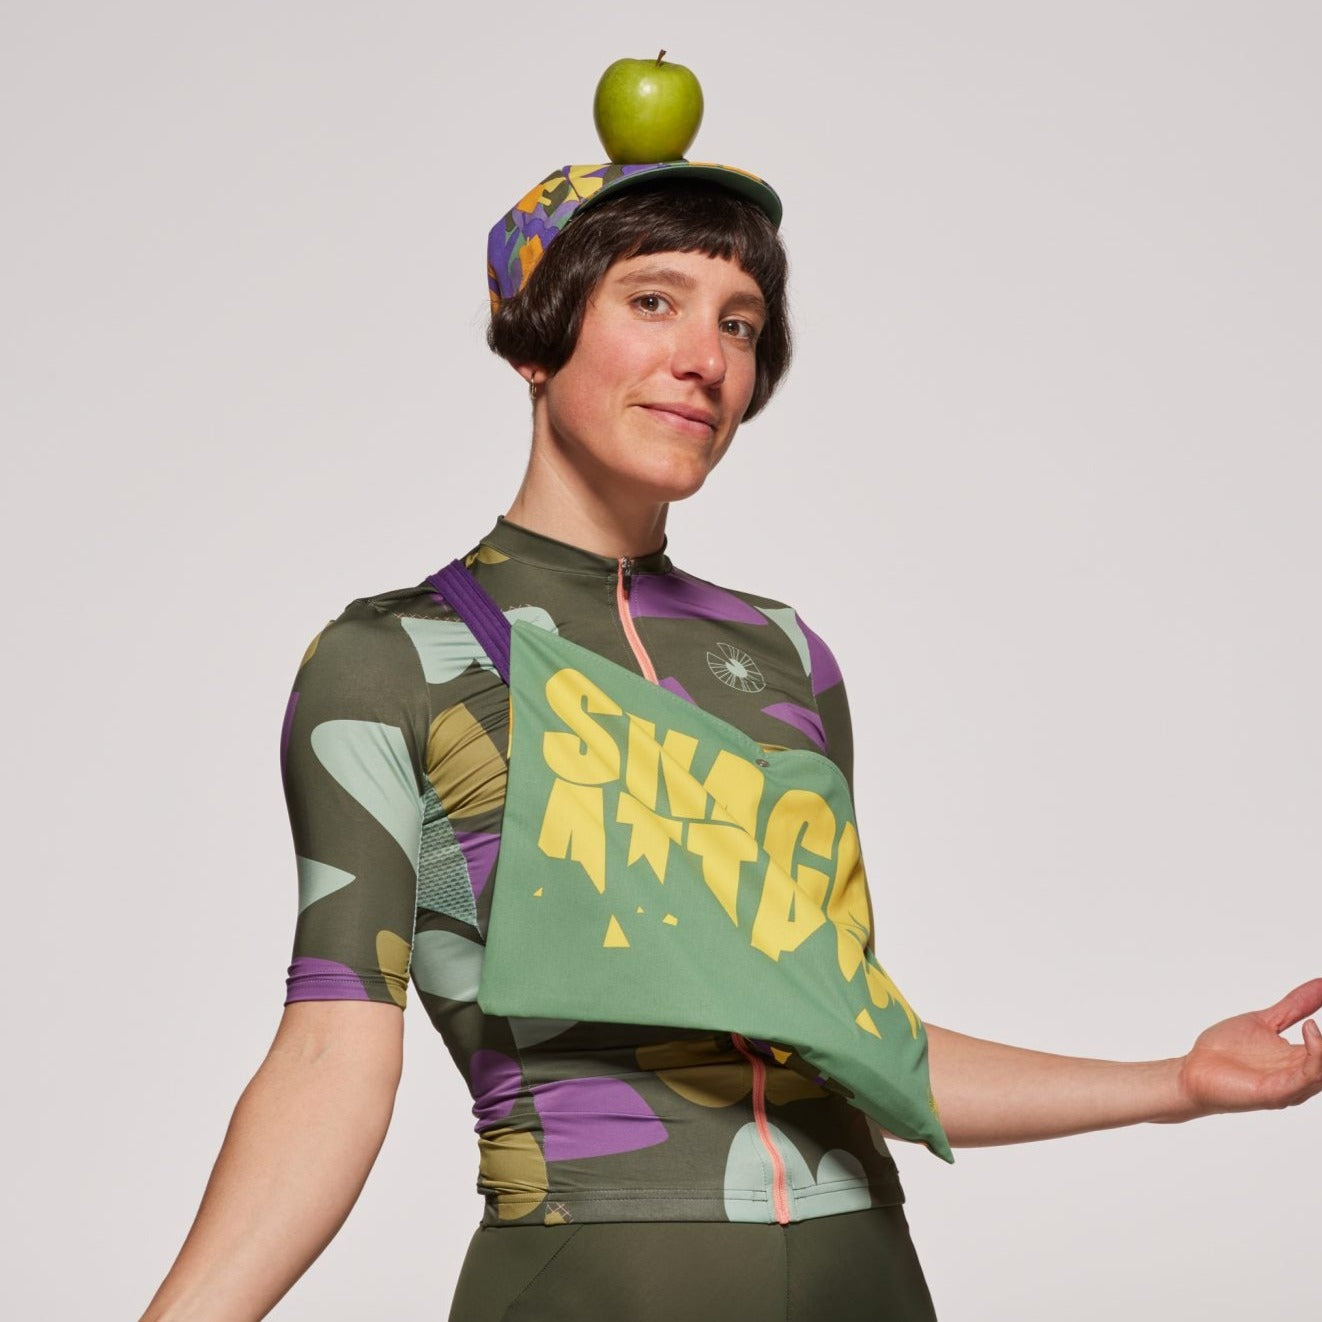 Cycling Musette – Snack Attack